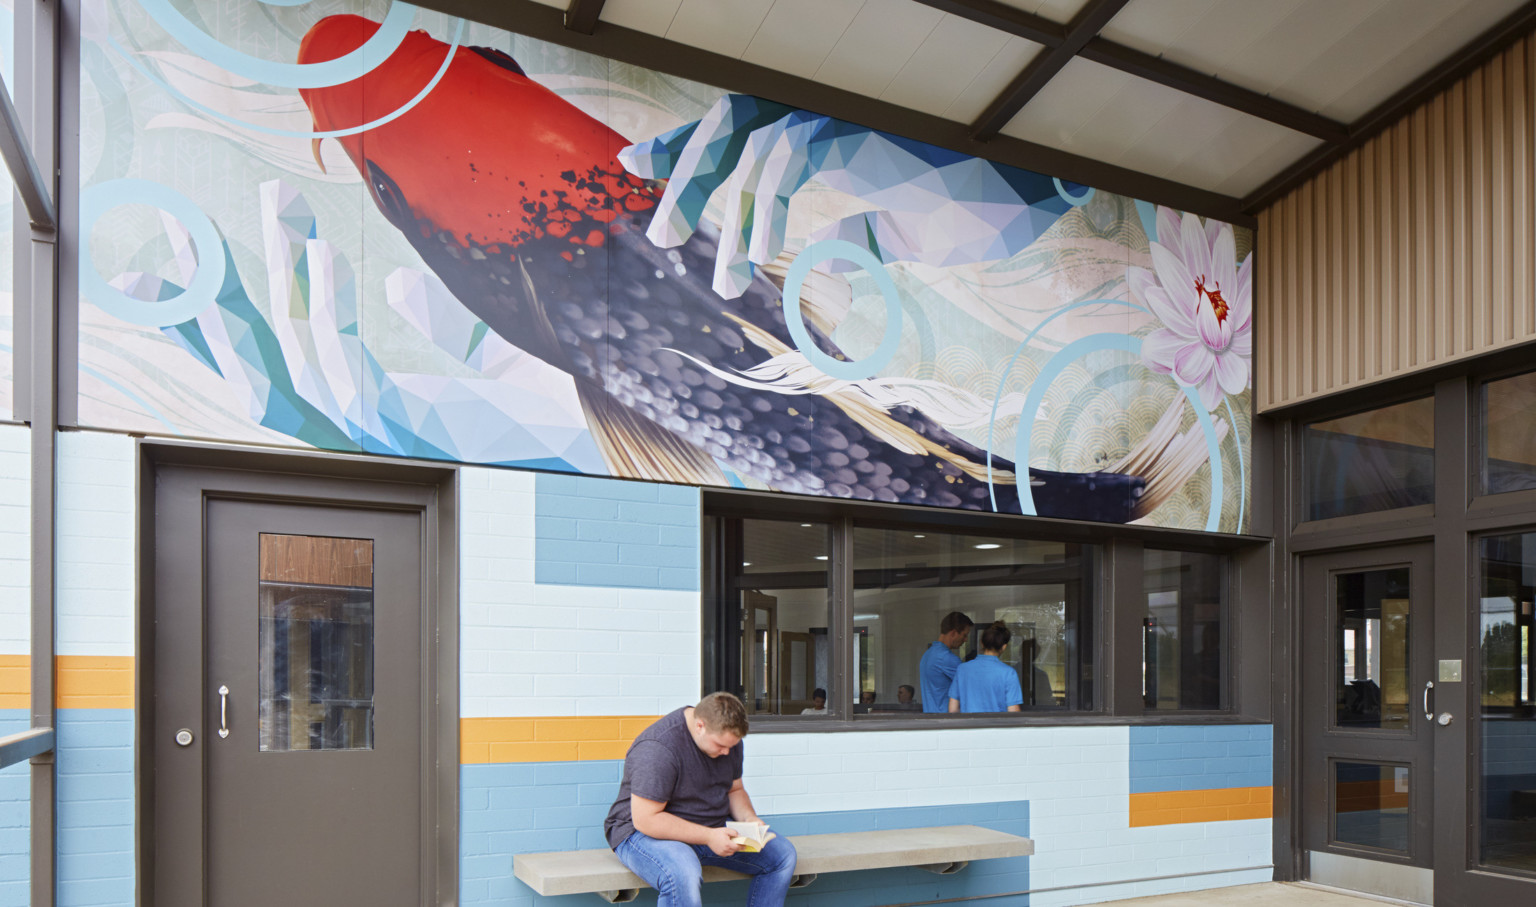 A grey bench against a blue and yellow colorblock wall with a window into an office. Above is a mural of a koi fish